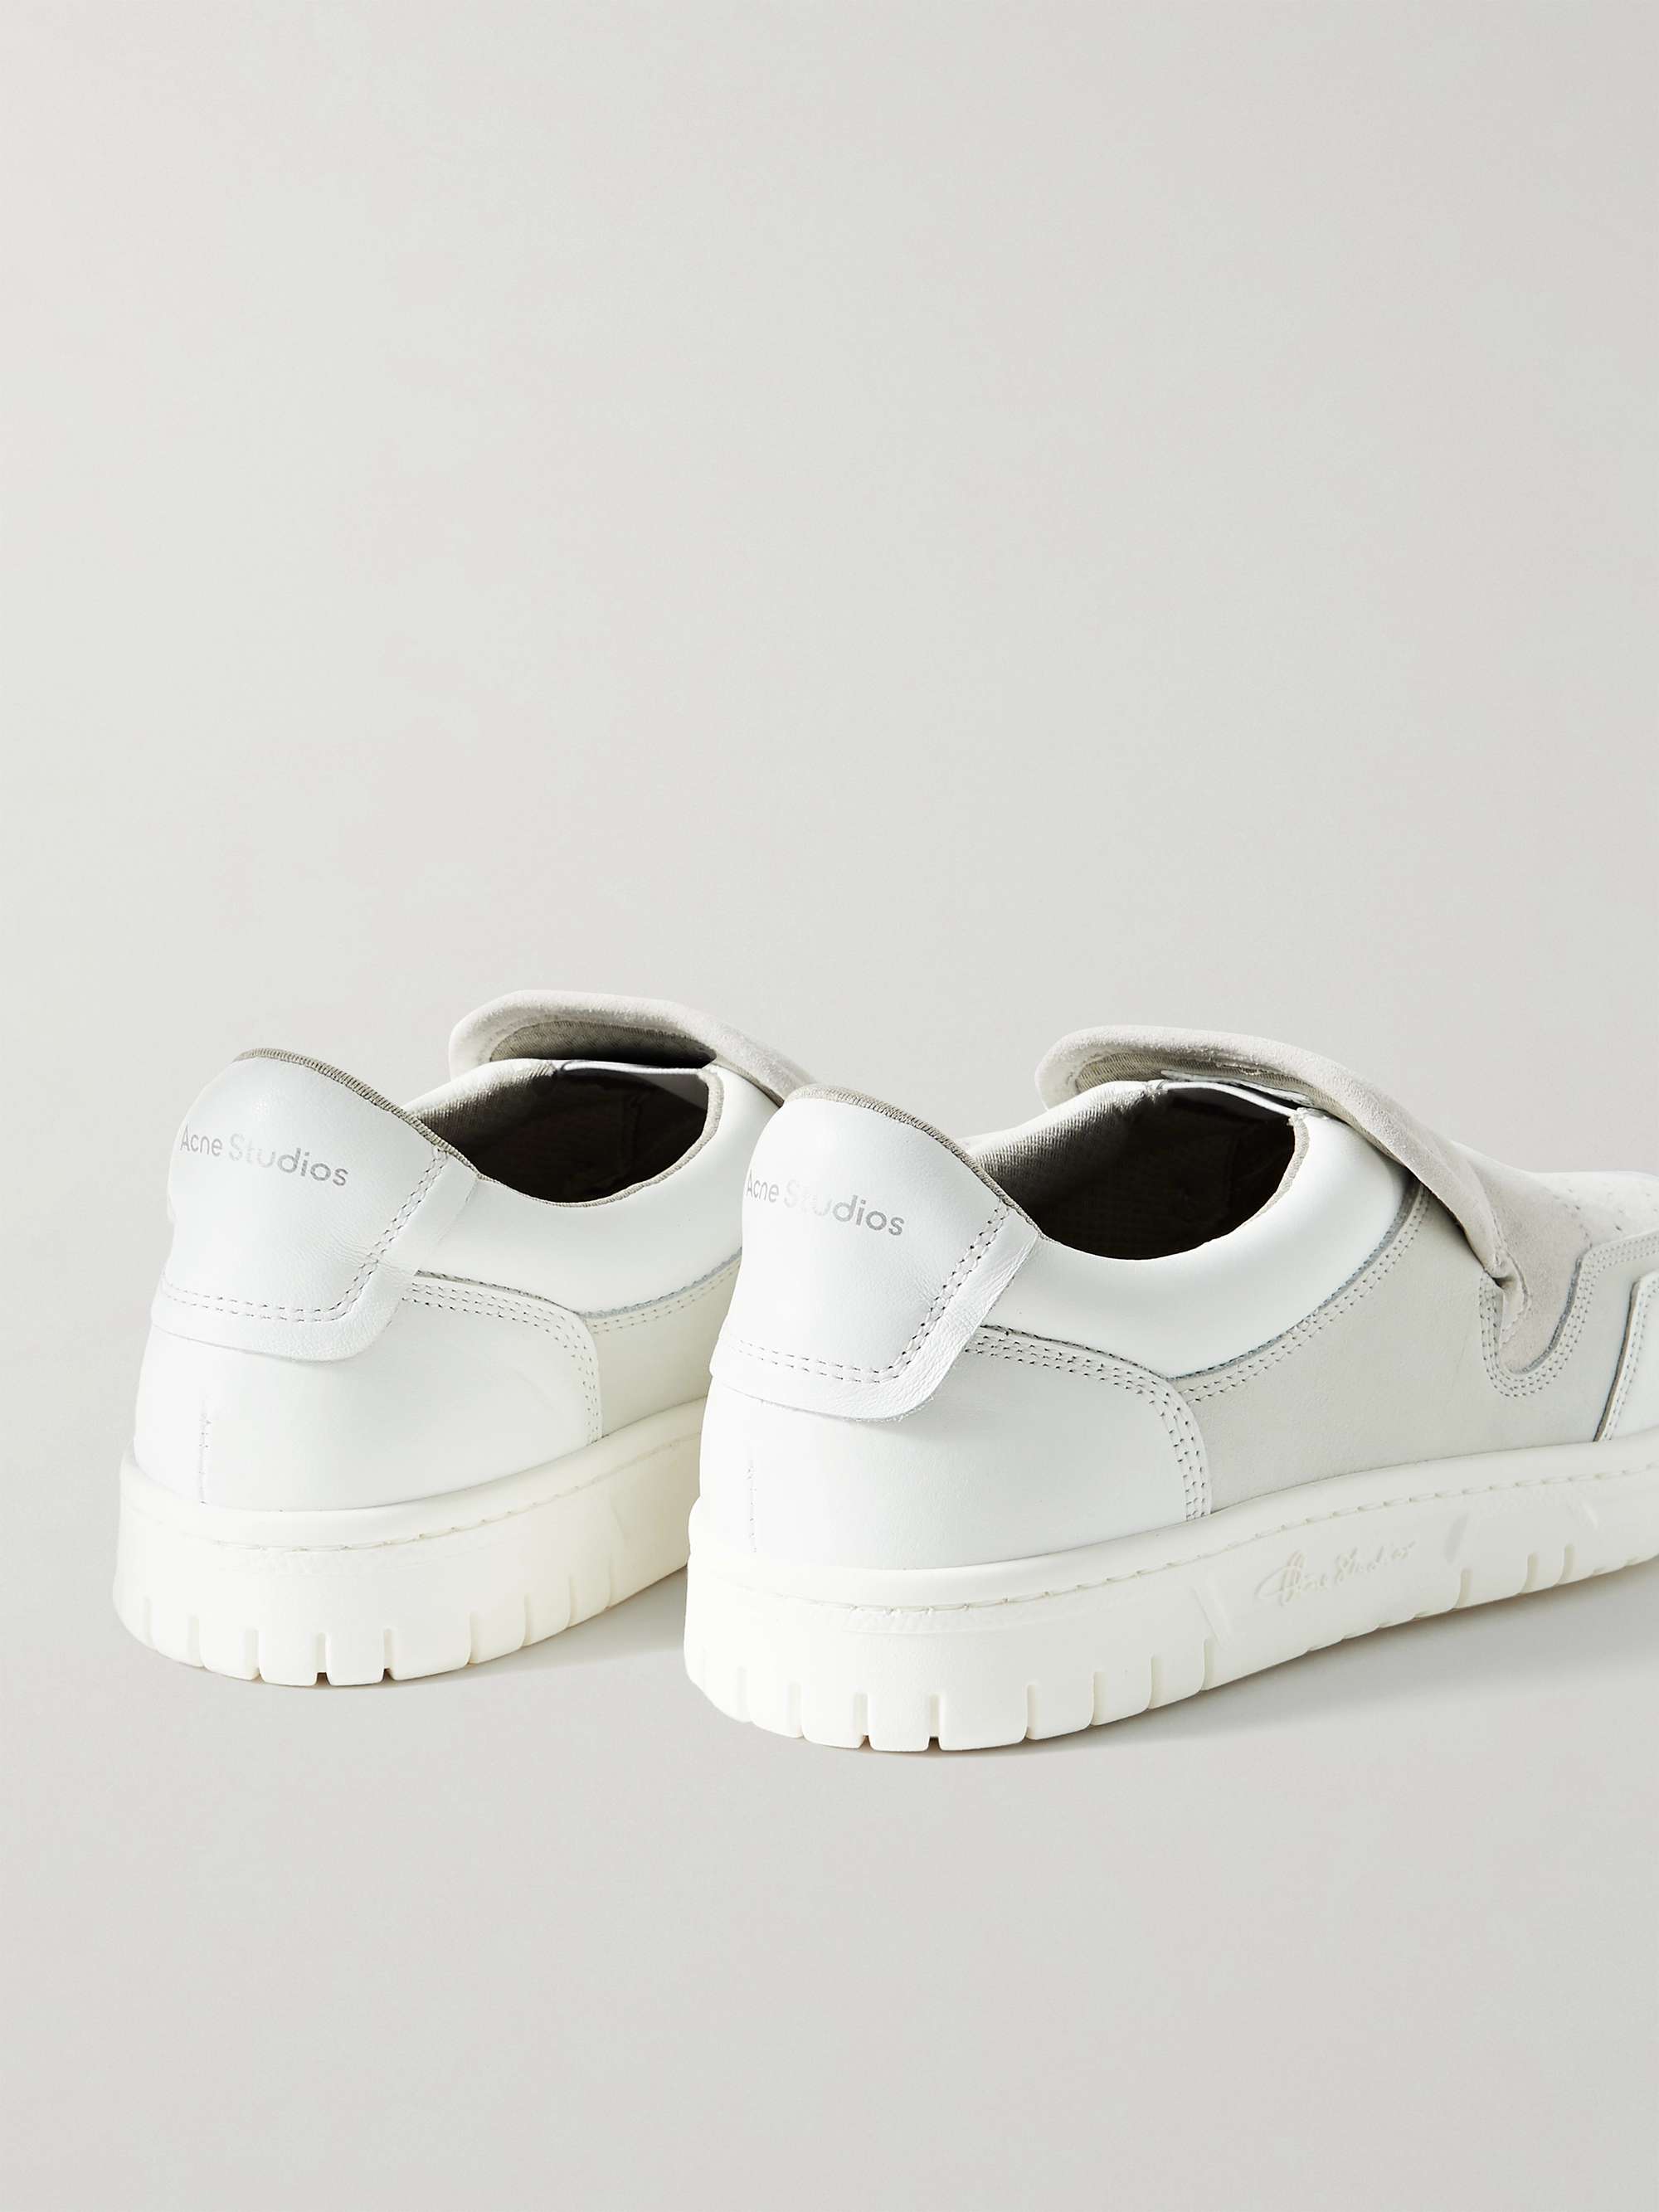 ACNE STUDIOS Buller Suede and Leather Slip-On Sneakers